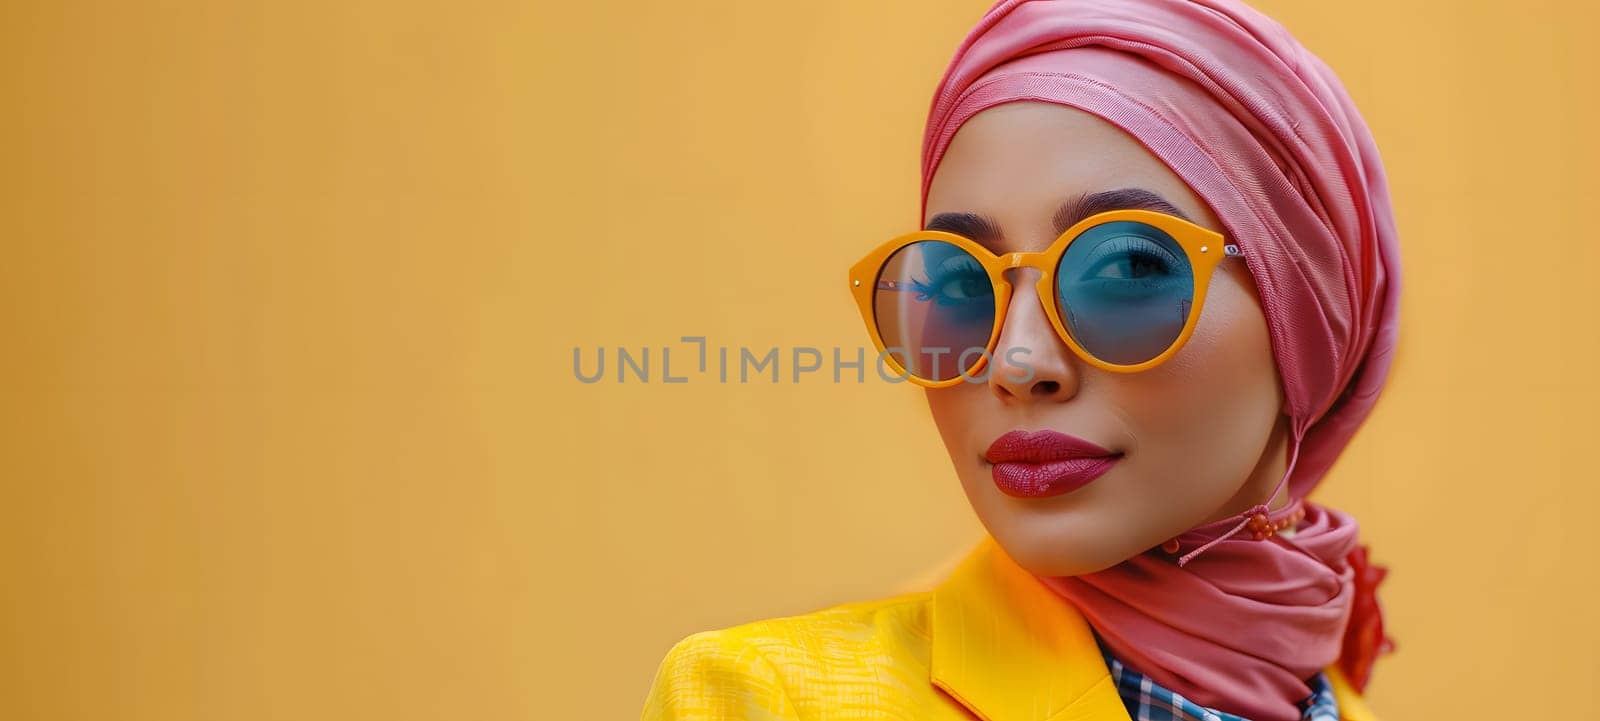 A woman in sunglasses and a hijab poses against a yellow wall by Nadtochiy